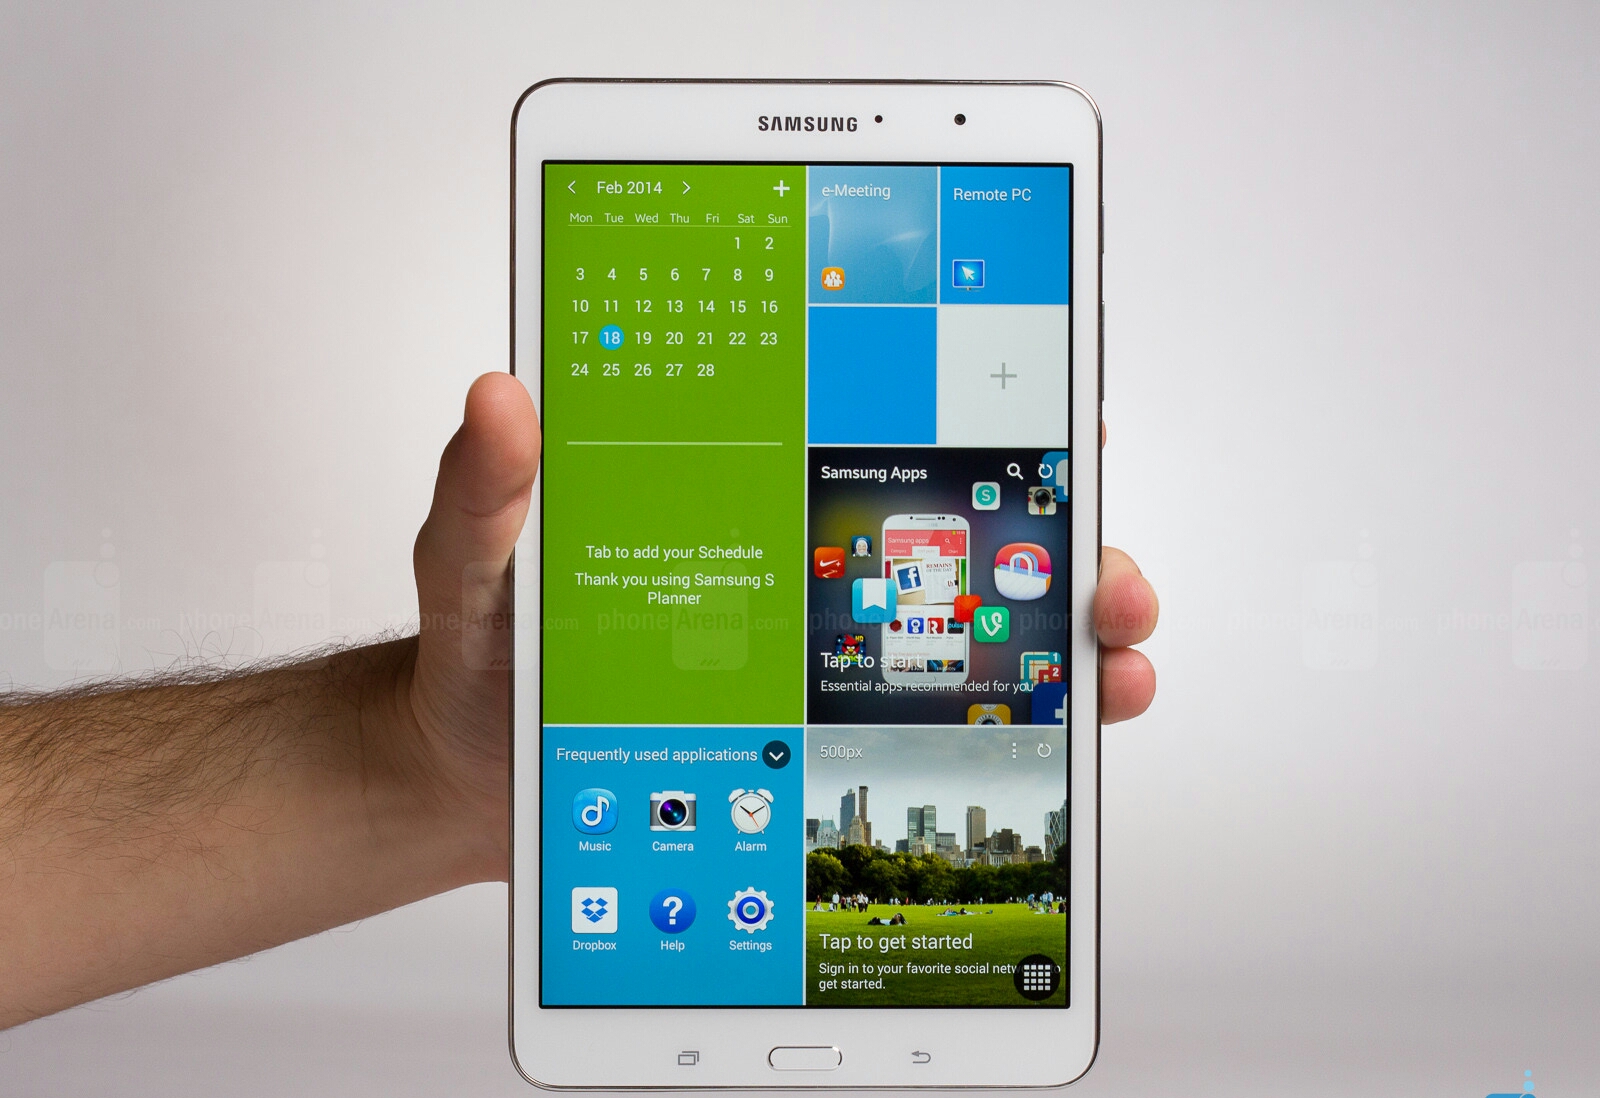 samsung-galaxy-tab-a-8-0-lte-sm-p355-official-android-lollipop-5-0-2